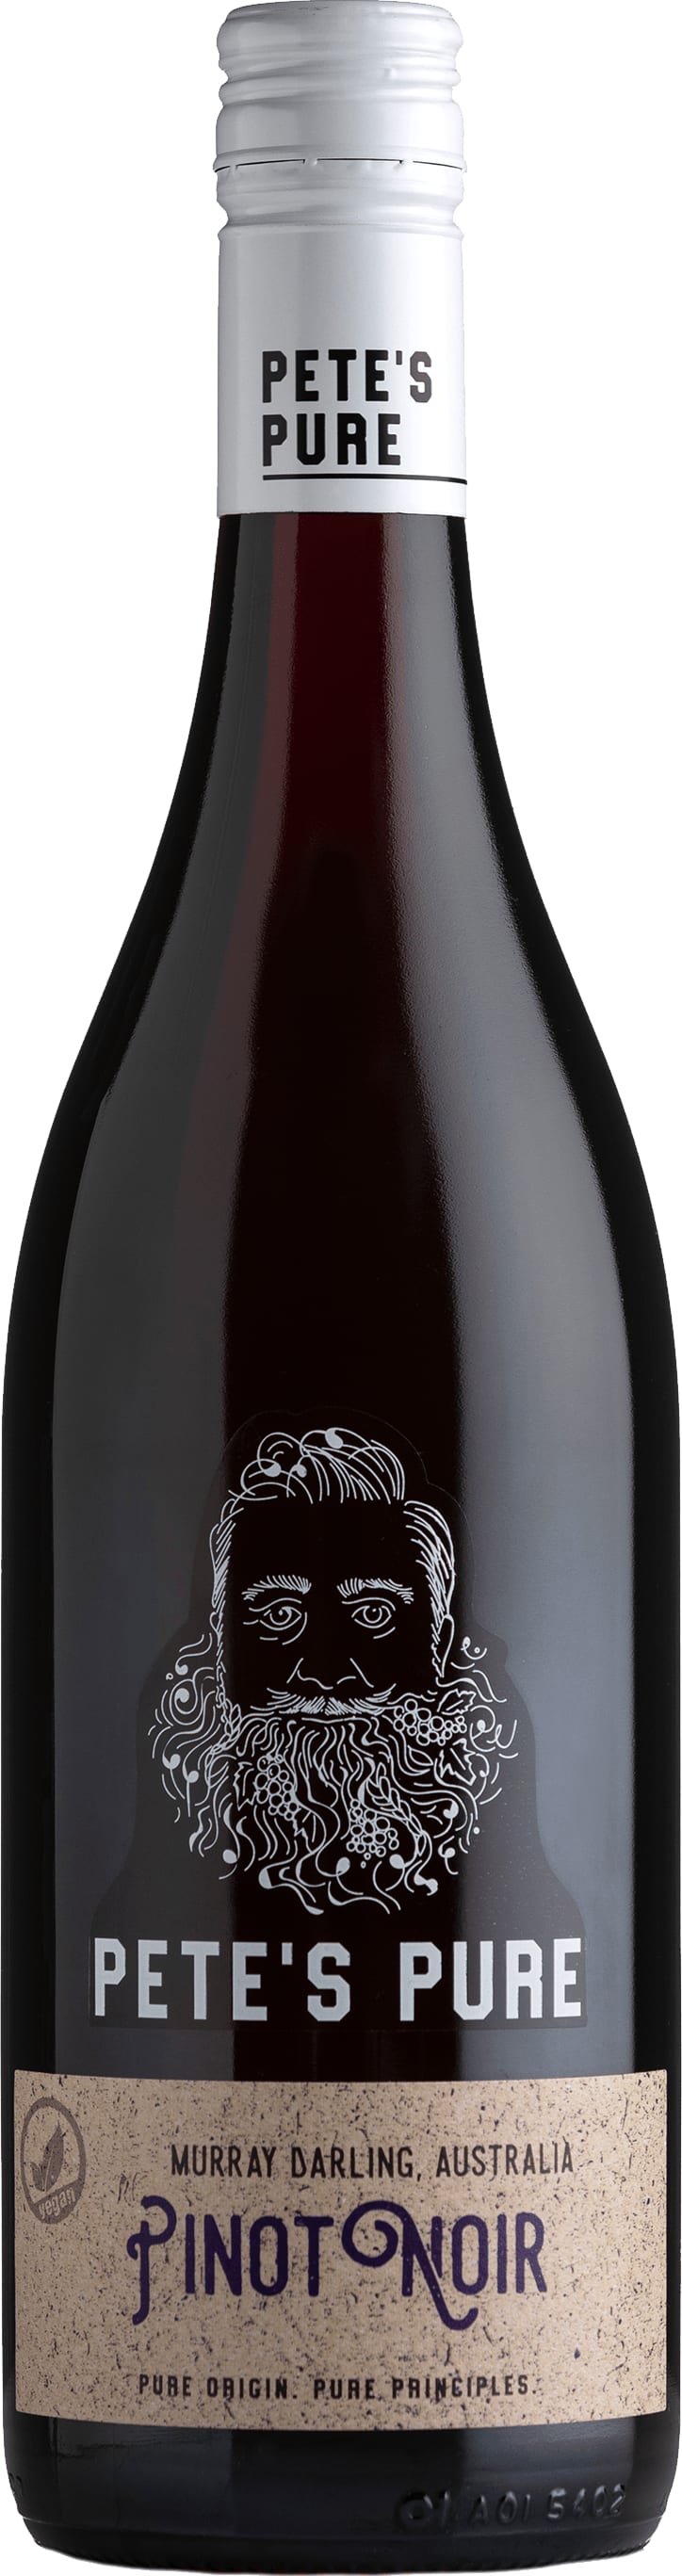 Pete's Pure Wine Pinot Noir 2021 75cl - Buy Pete's Pure Wine Wines from GREAT WINES DIRECT wine shop